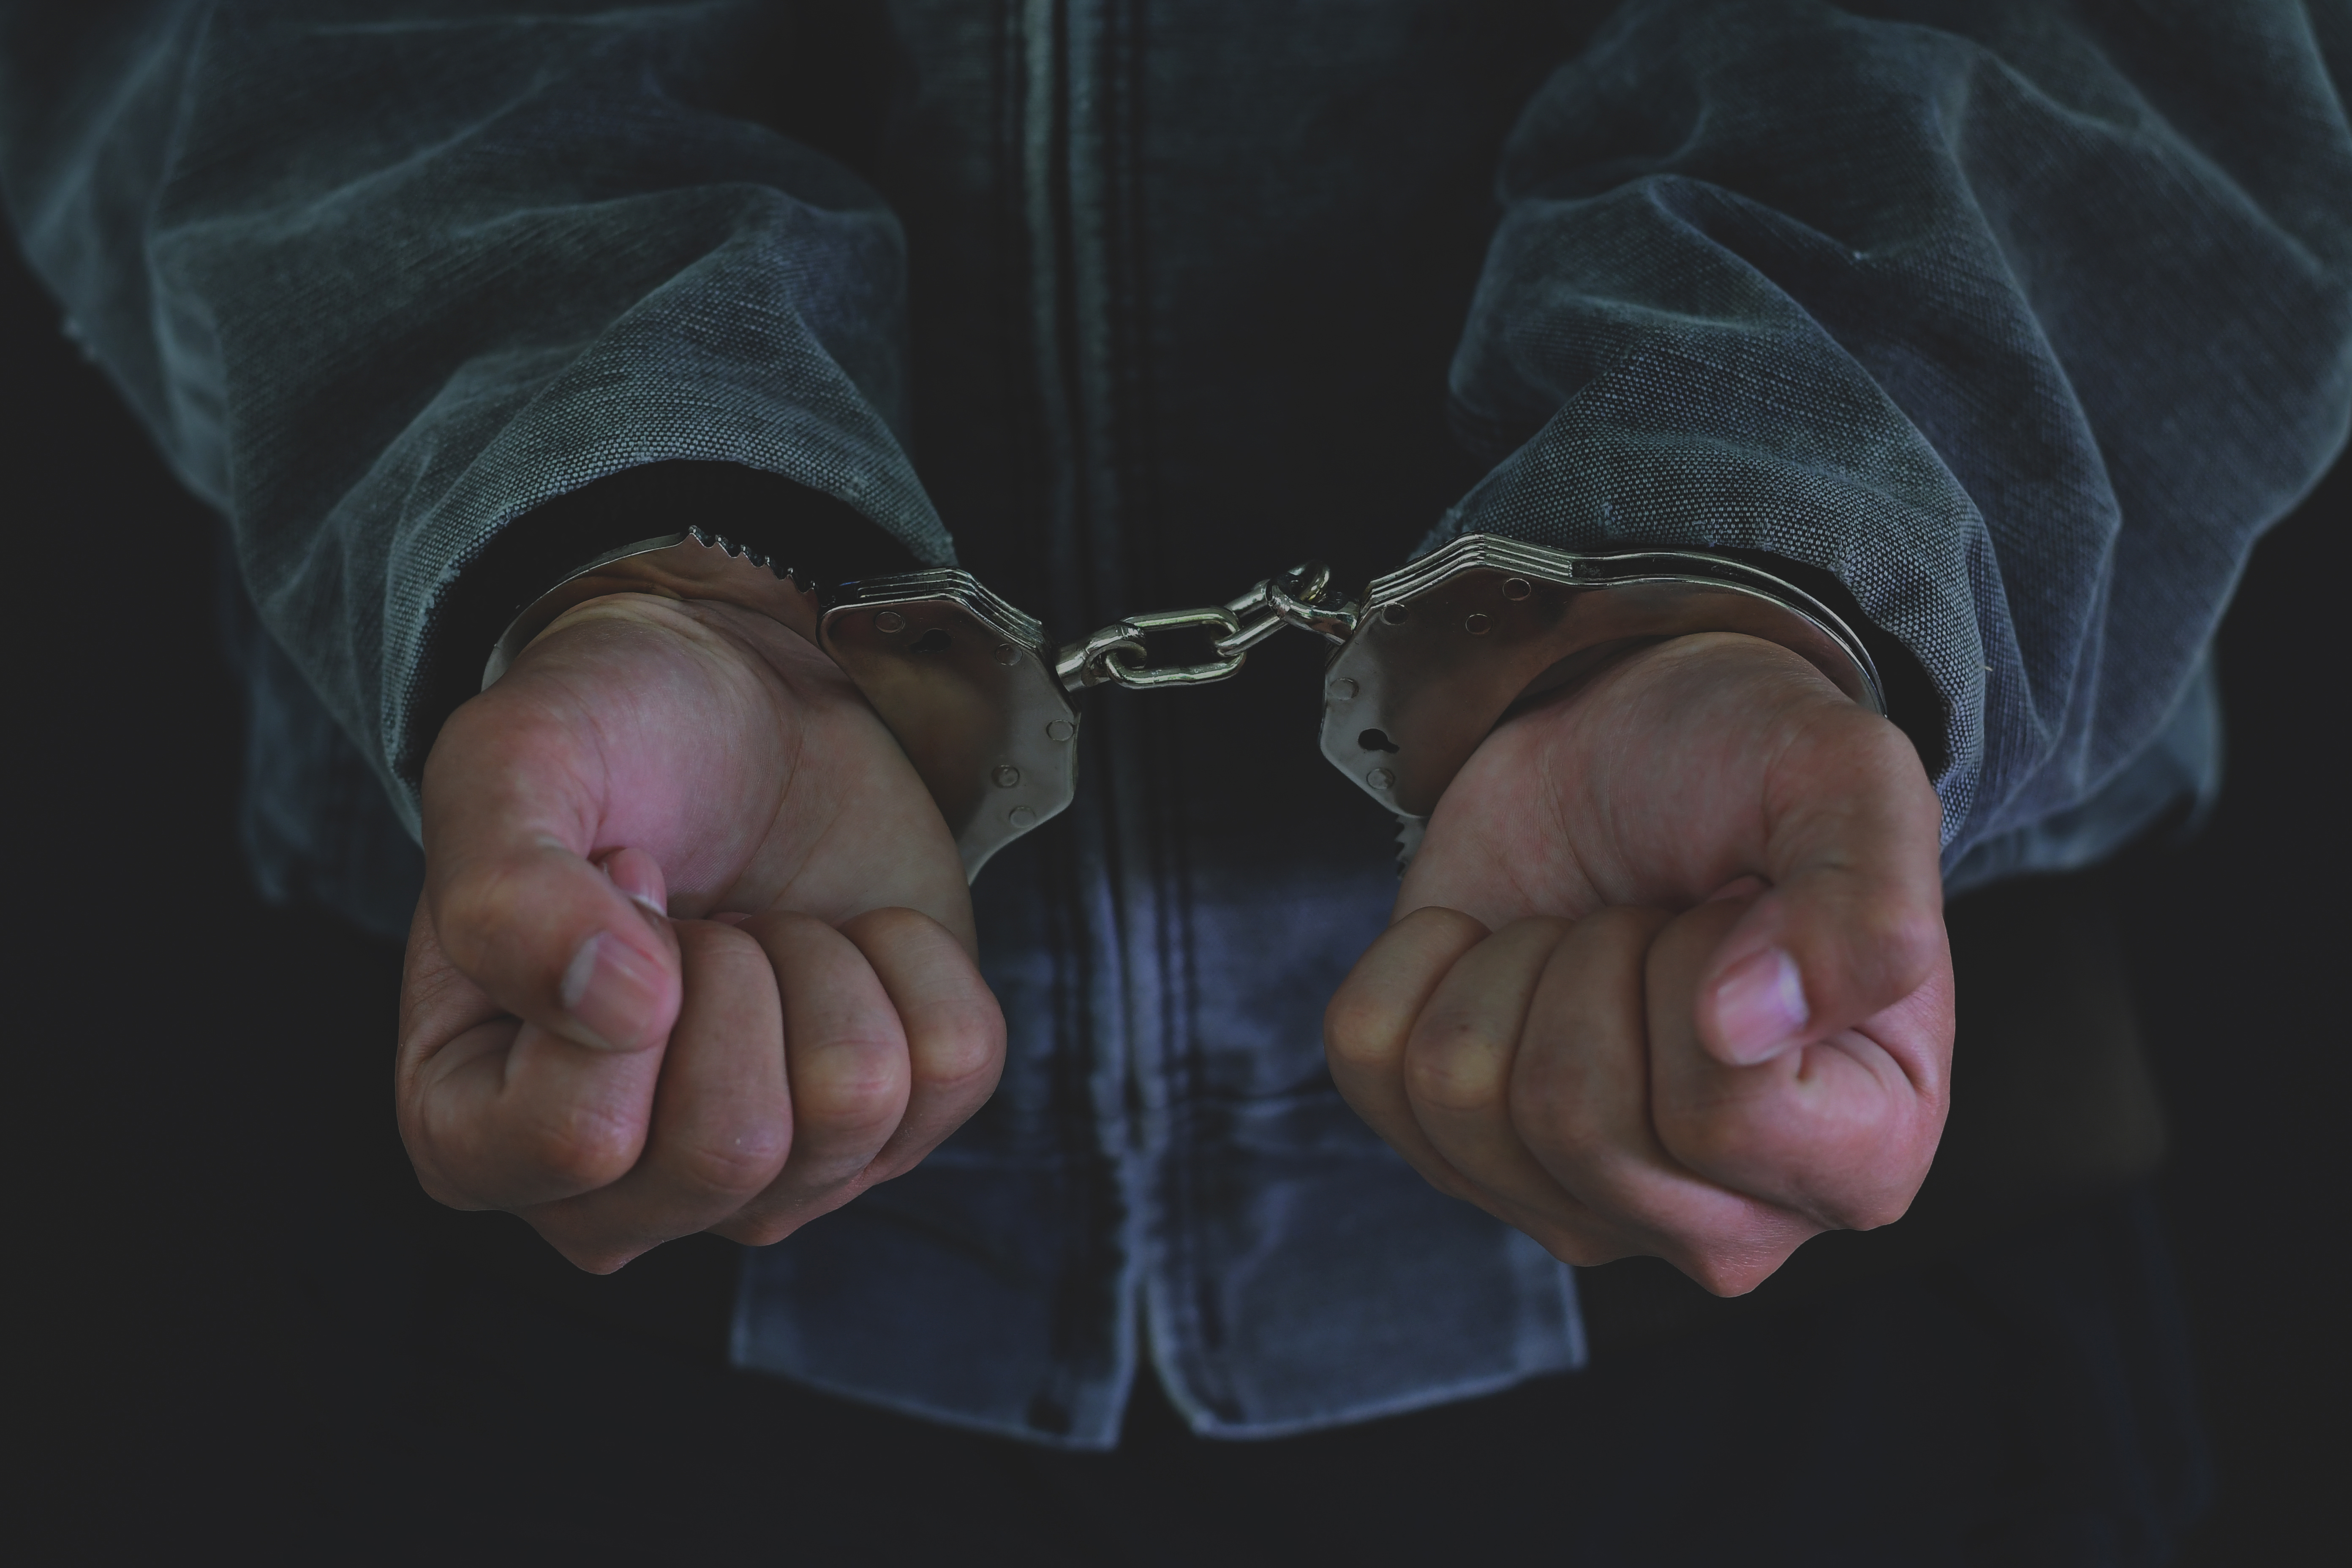 A suspect is in handcuffs. Shutterstock image via Lovely Bird